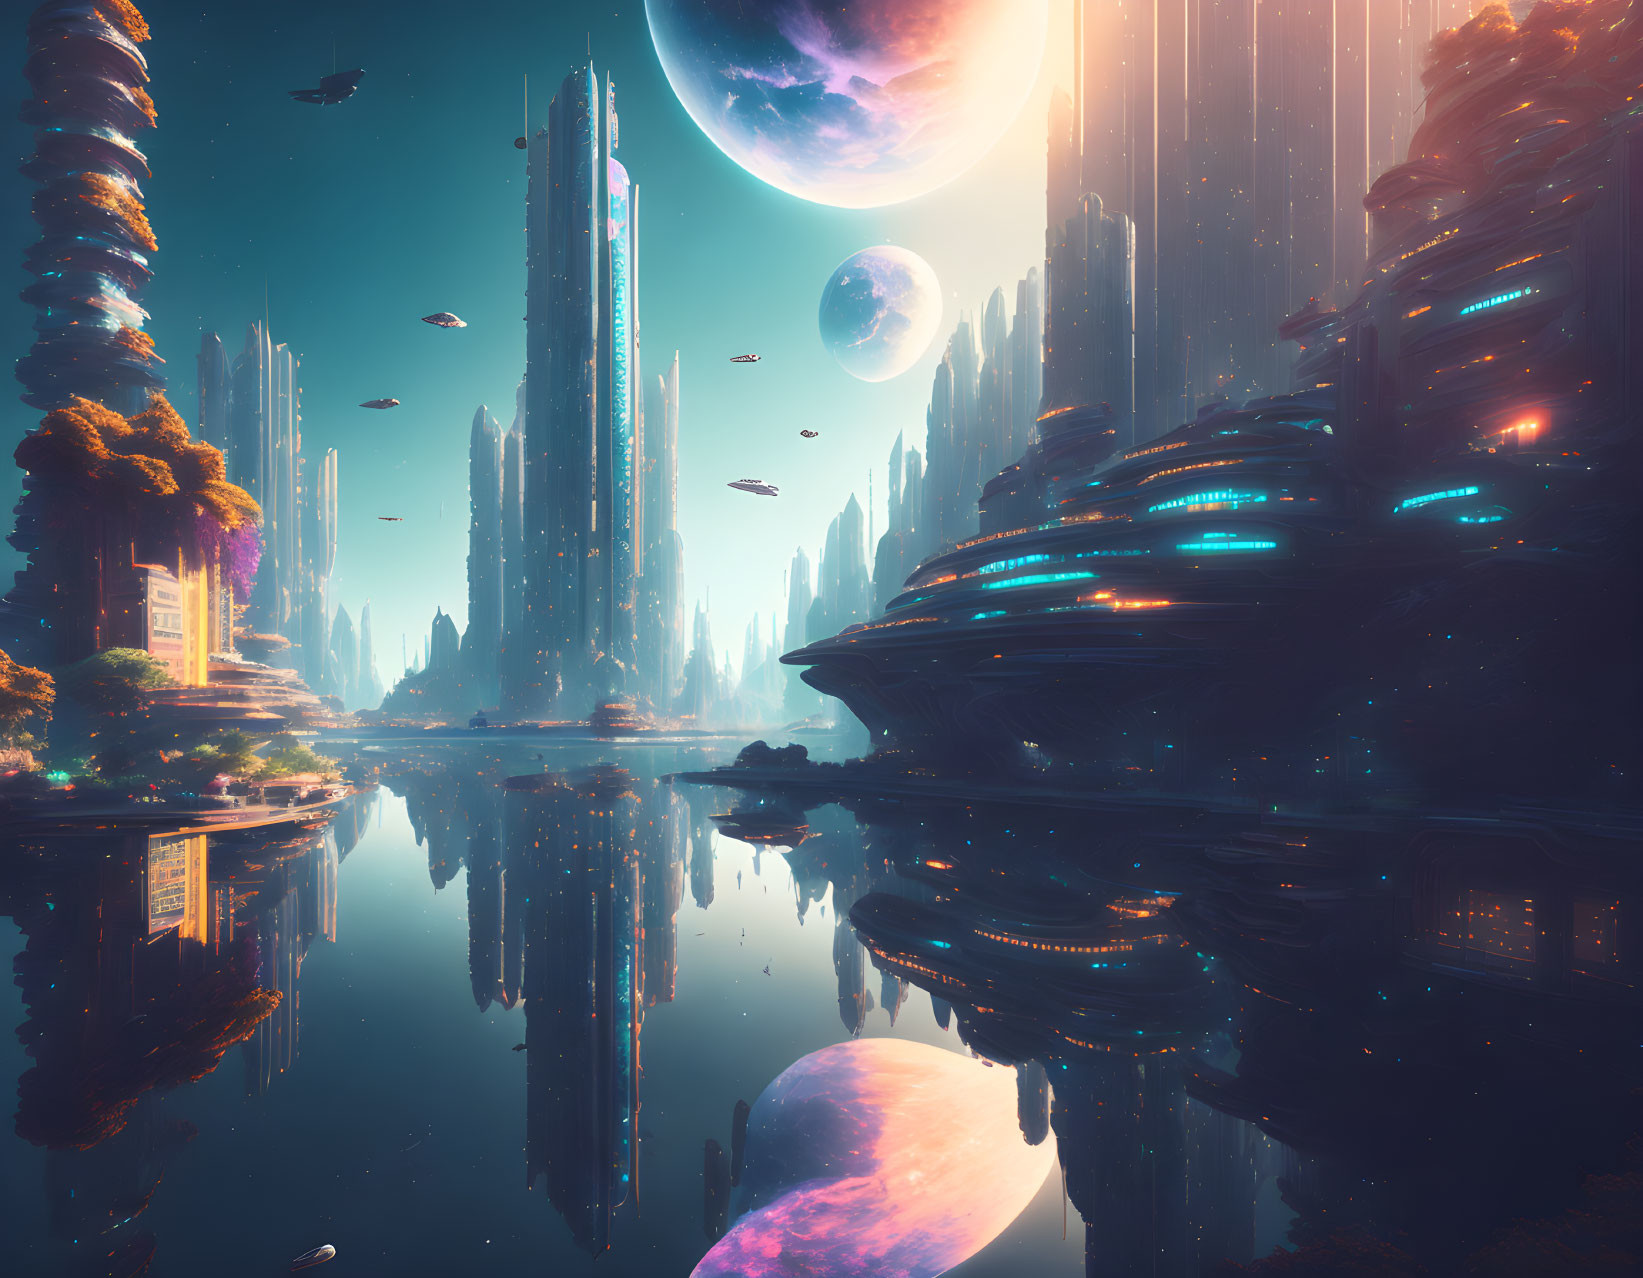 Futuristic cityscape with skyscrapers, flying vehicles, and celestial bodies reflected in water.